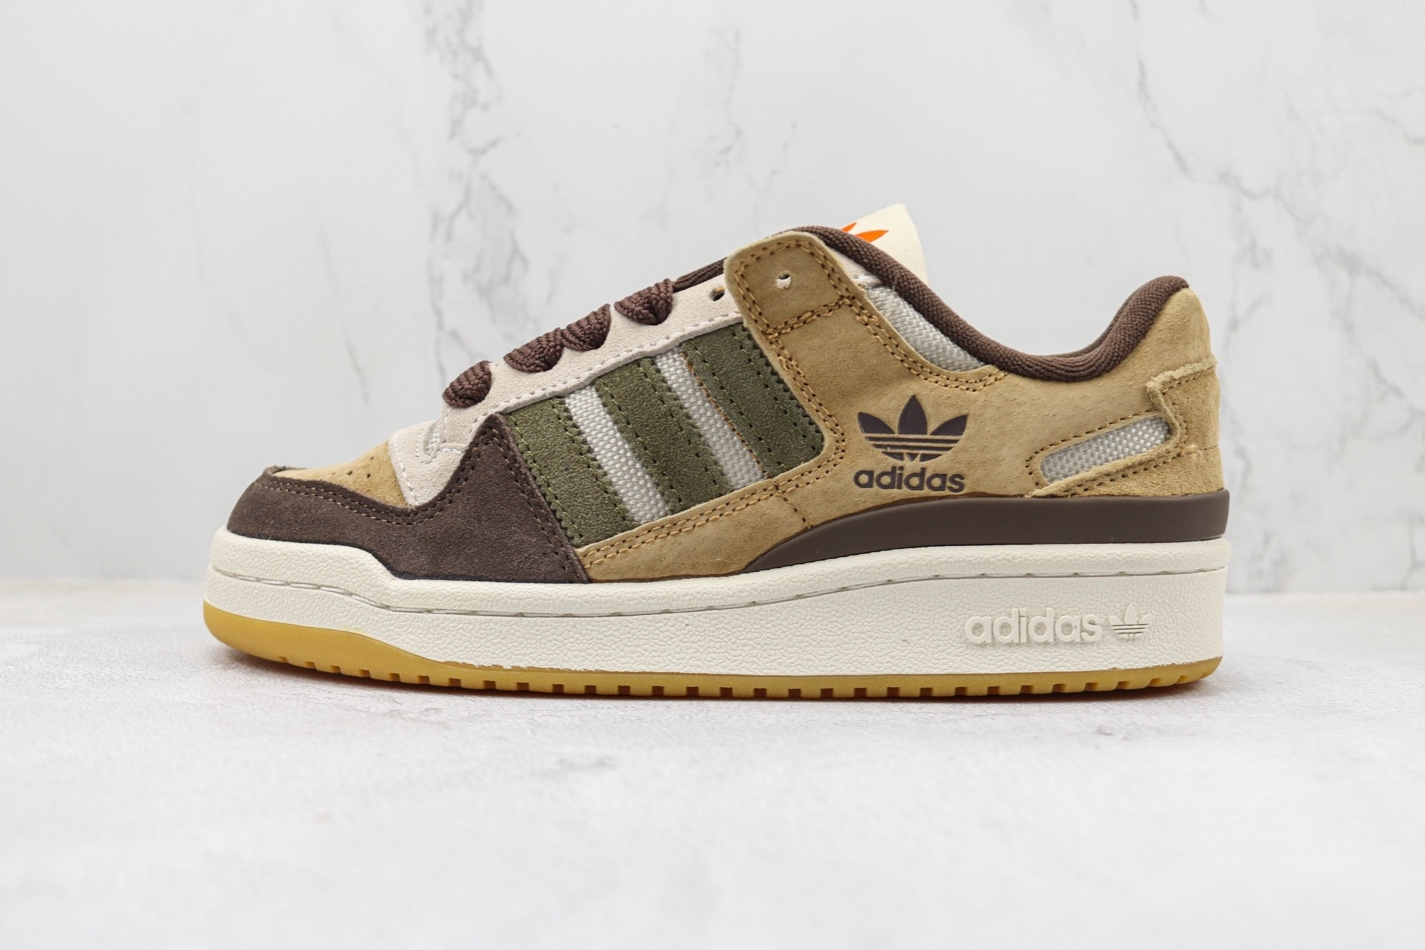 Adidas Forum Low 84 'Branch Brown' GW4334 - Trendy and Stylish Sneakers